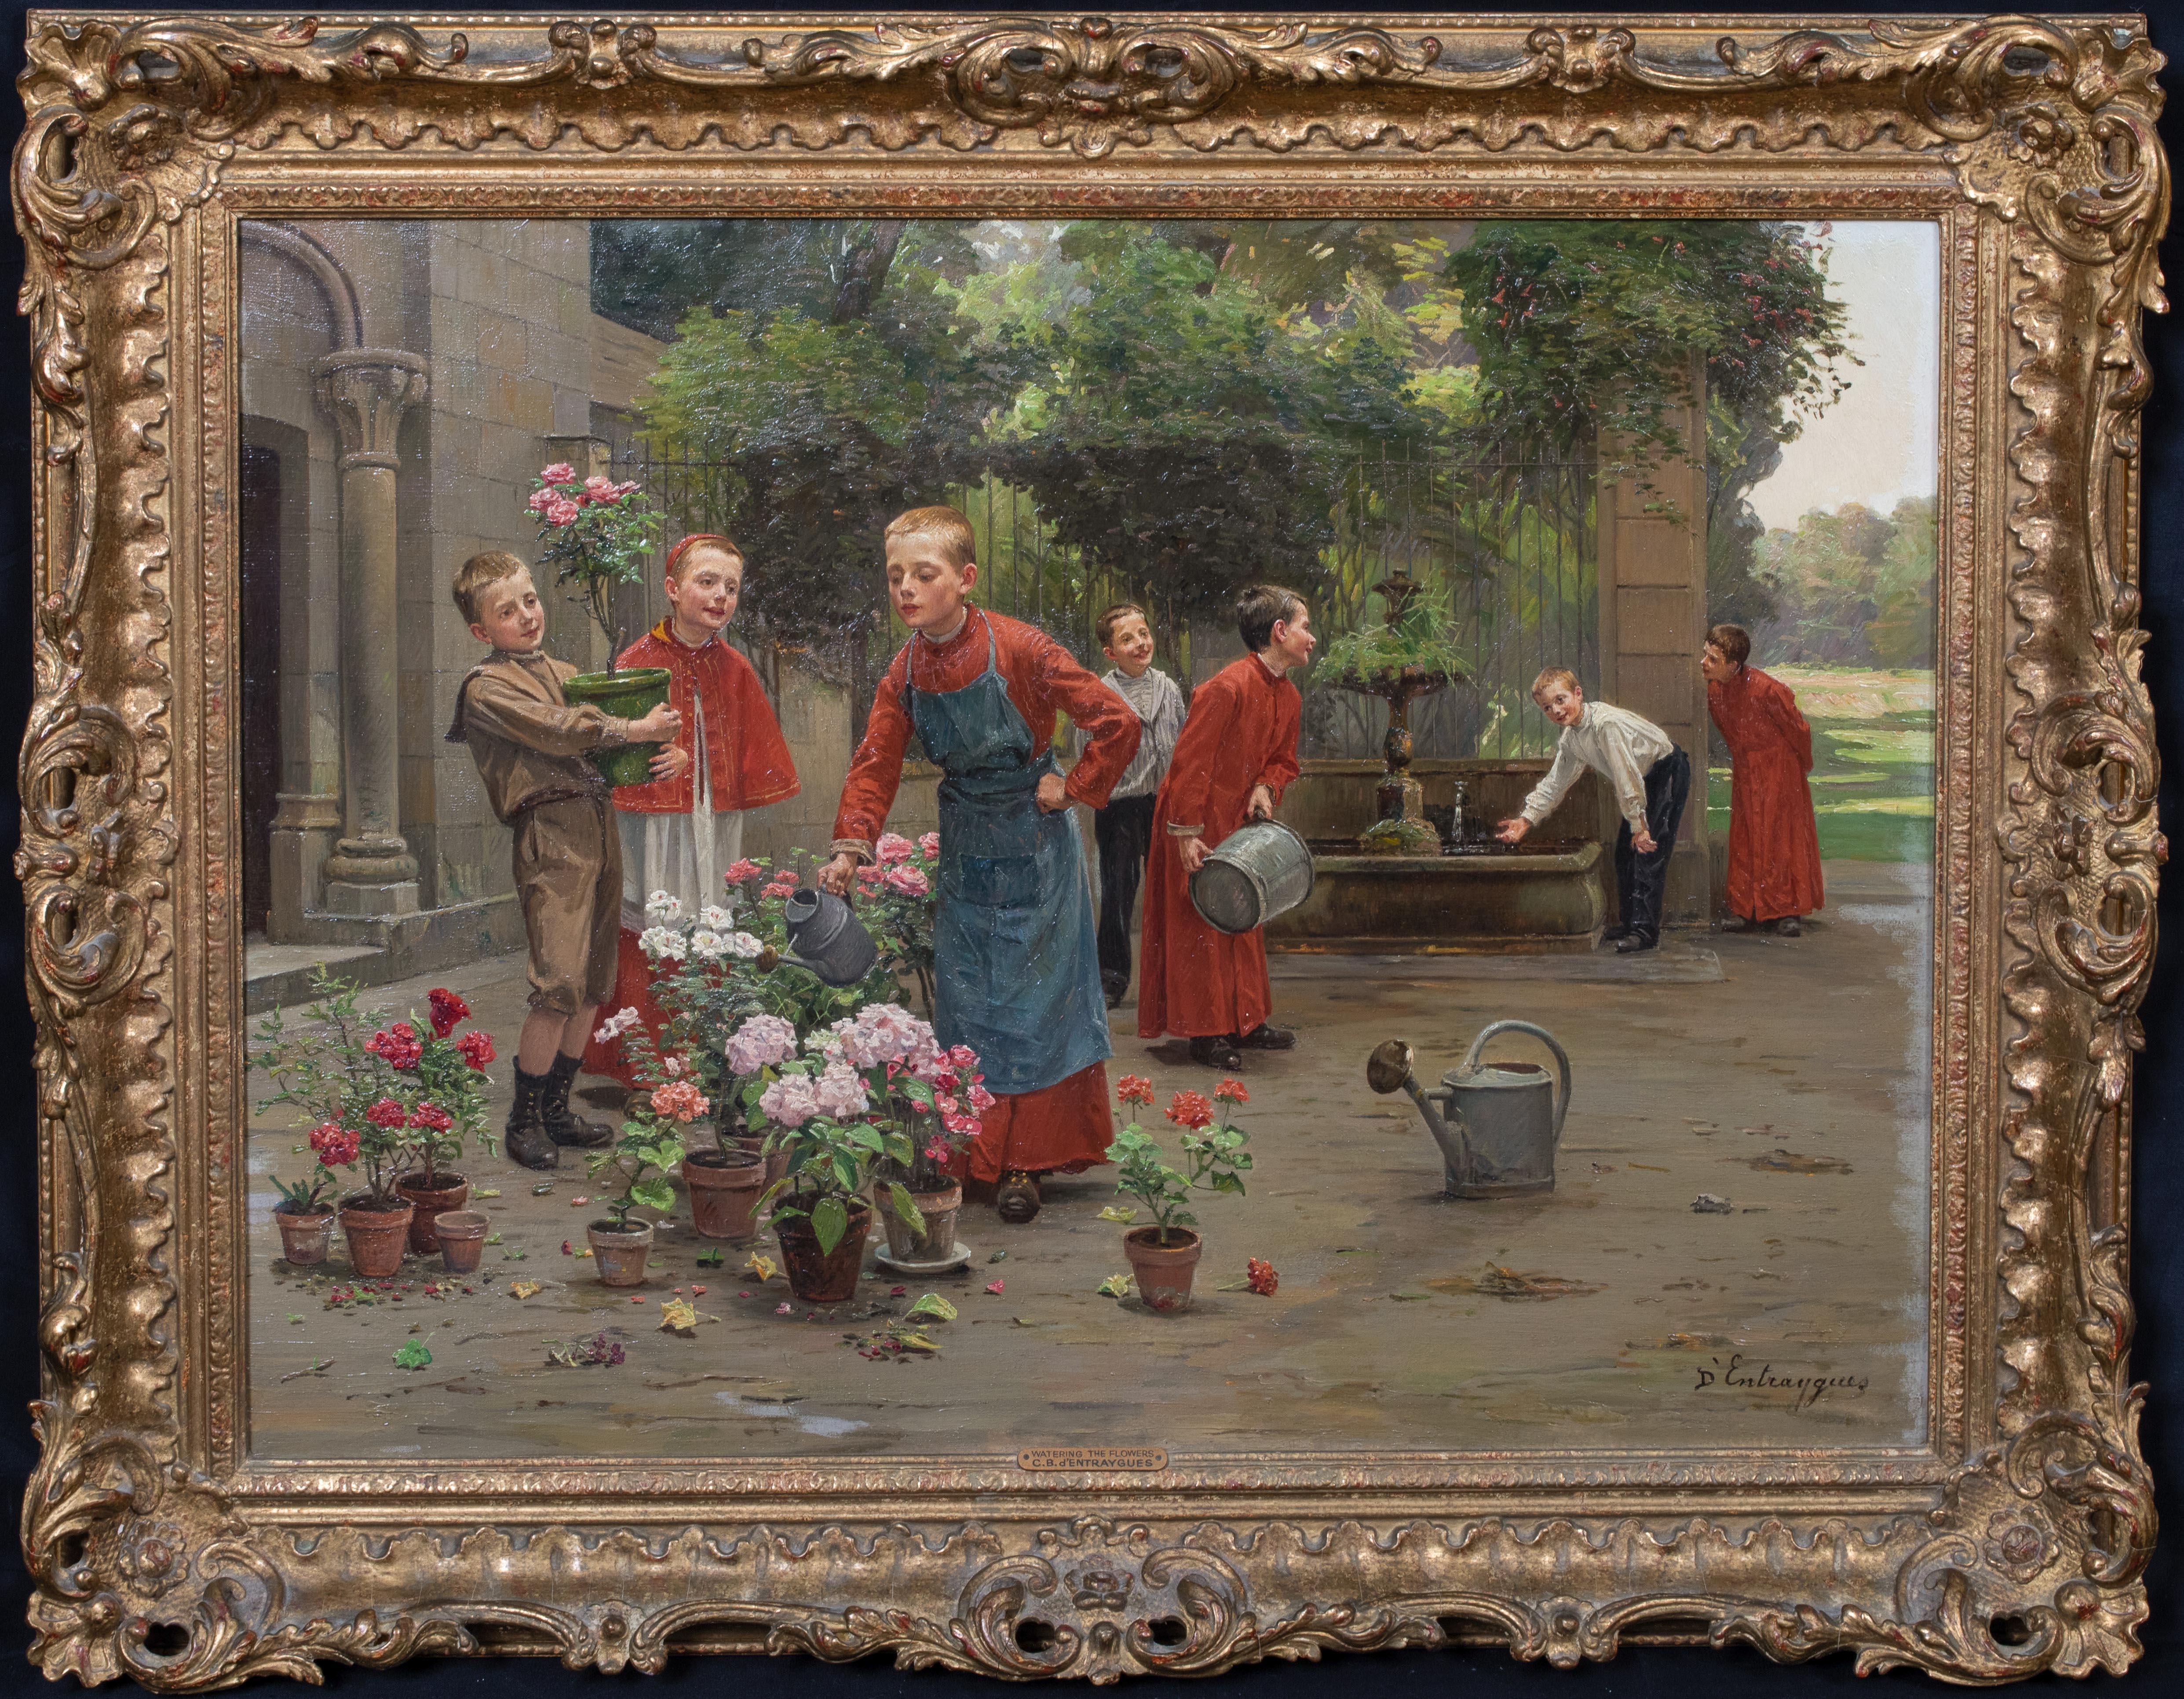 Unknown Landscape Painting - The Young Gardeners, 19th Century  by Charles Bertrand d'Entraygues